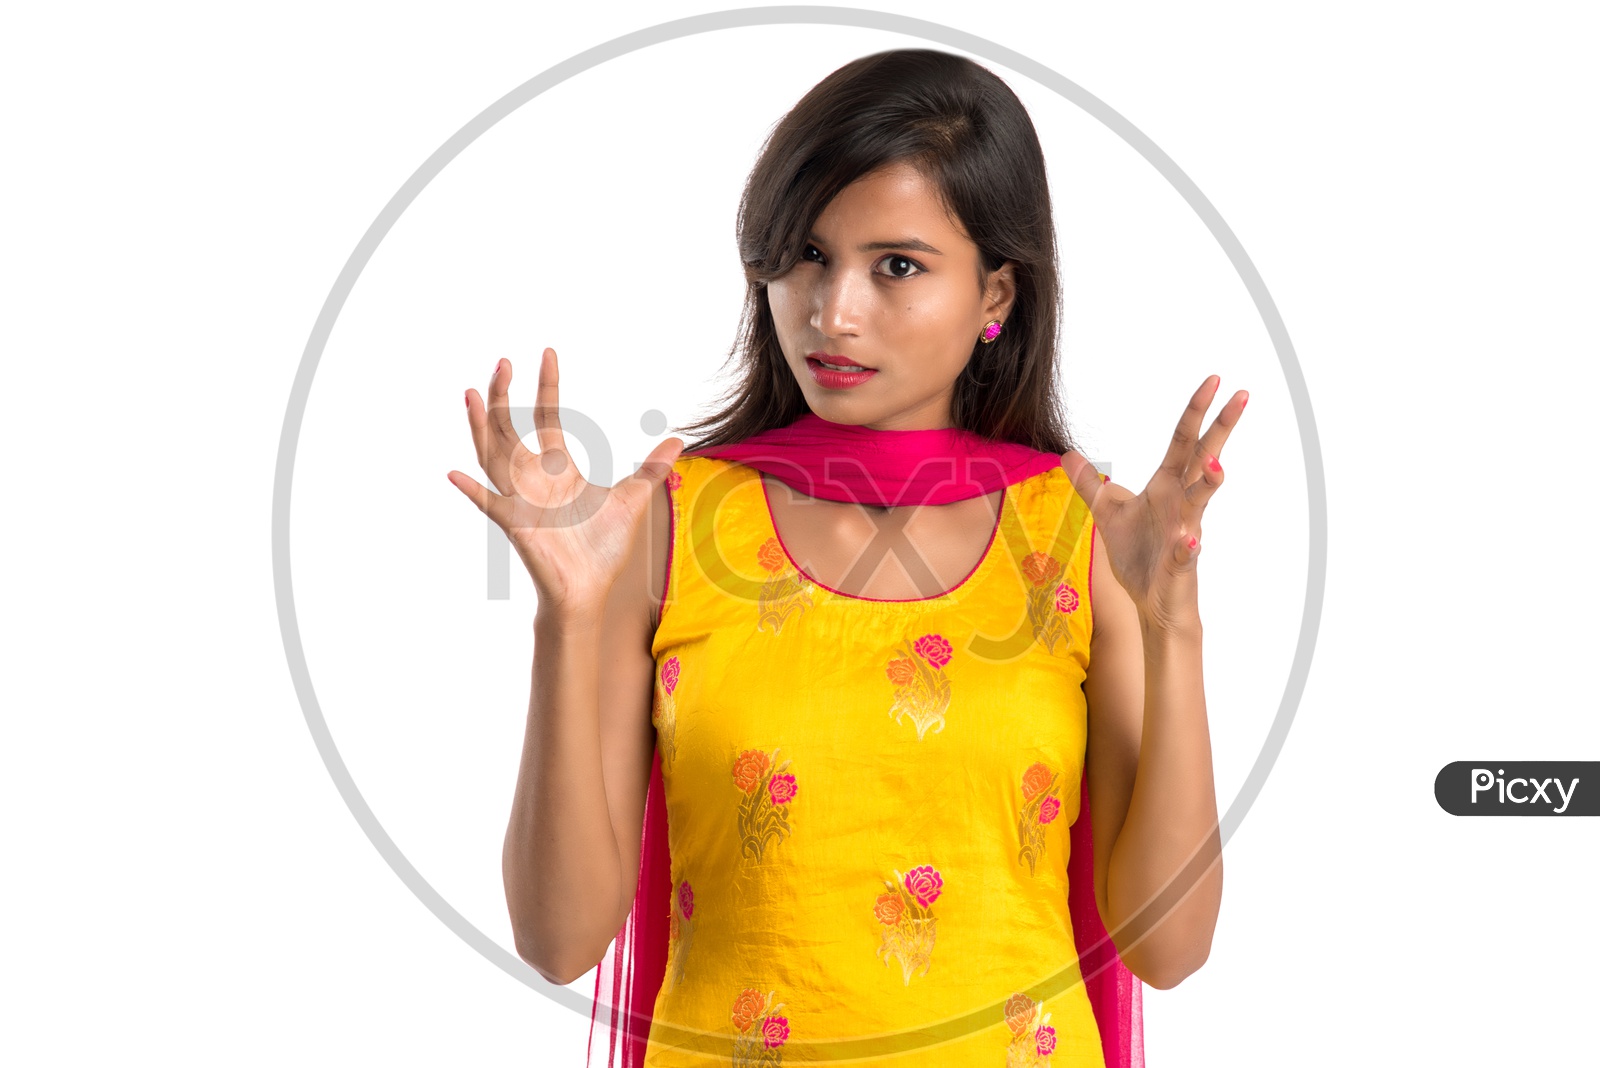 Young Indian Woman or Girl With Angry  Expressions And Gestures On an Isolated White Background